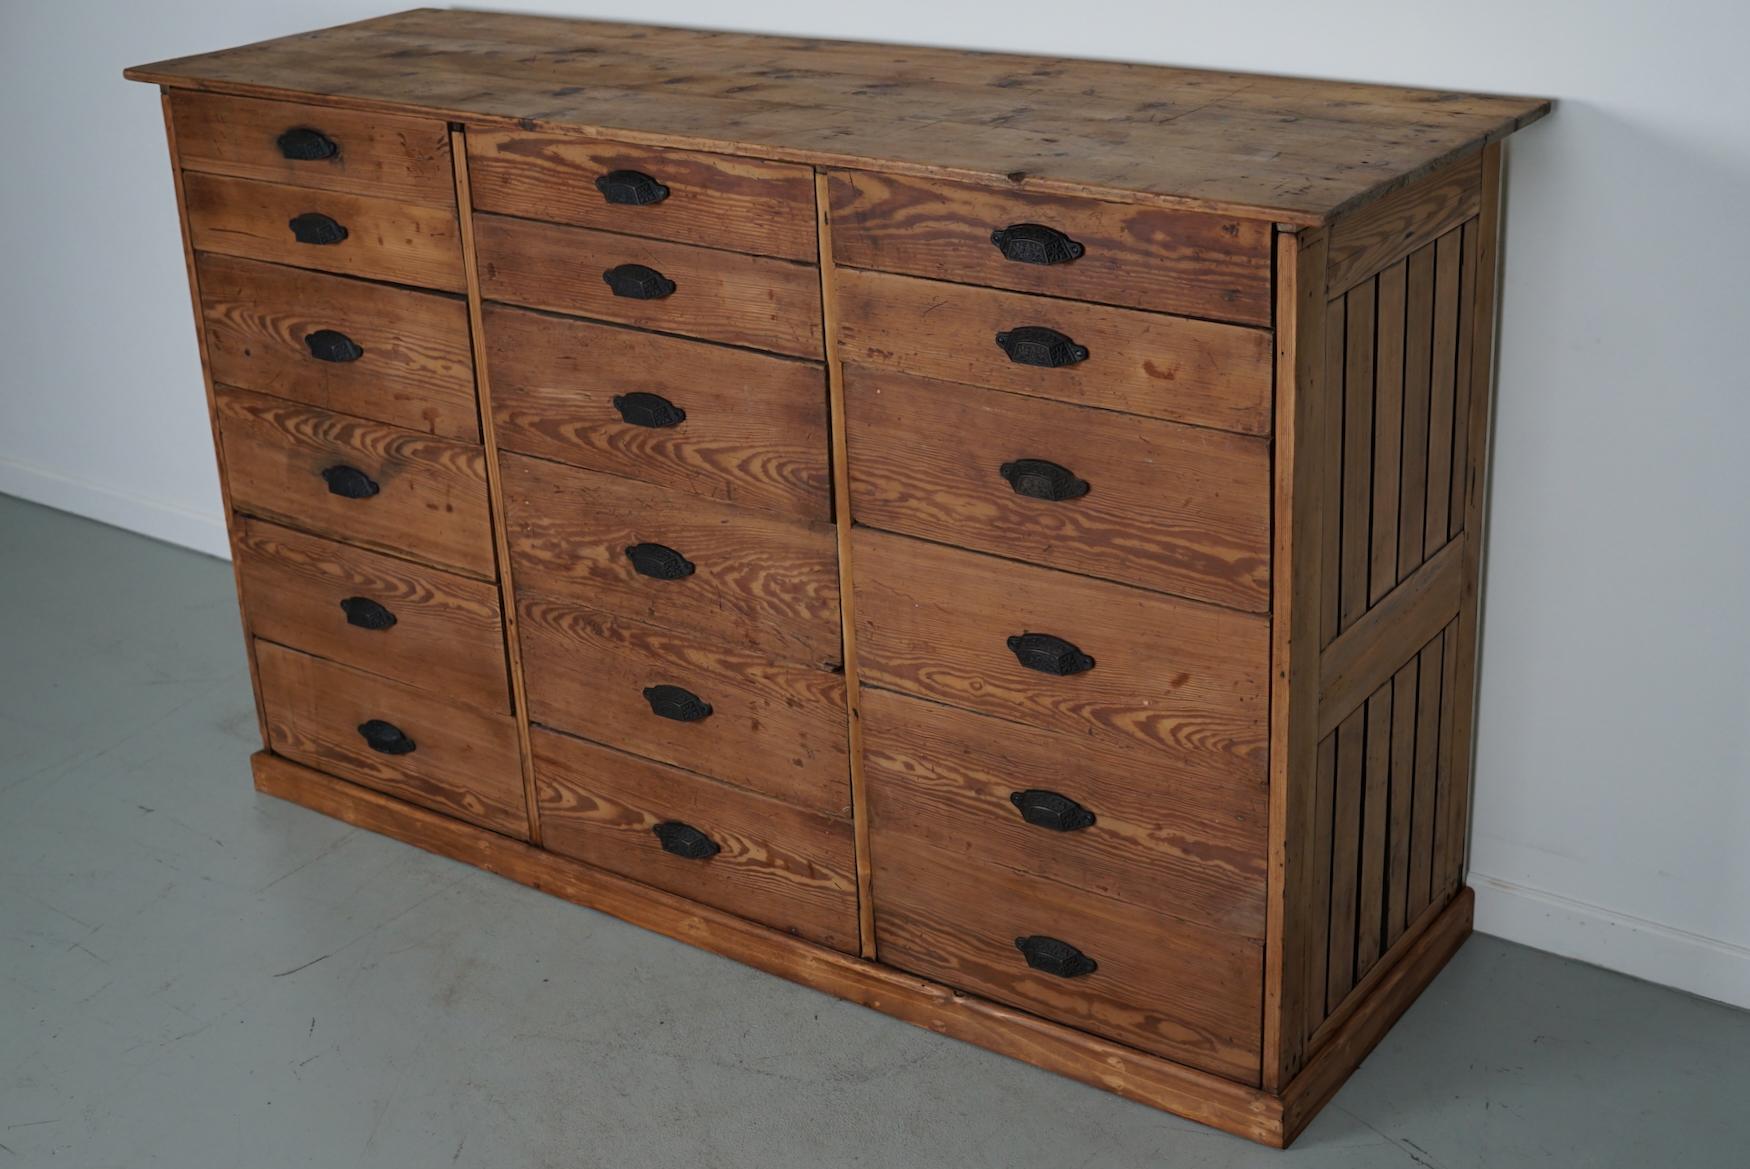 This apothecary bank of drawers was designed and made circa 1900. It was made from pine and it features 18 drawers with cast iron handles. The interior dimensions of the drawers are: DWH 40 x 42 x 8 / 15 cm.